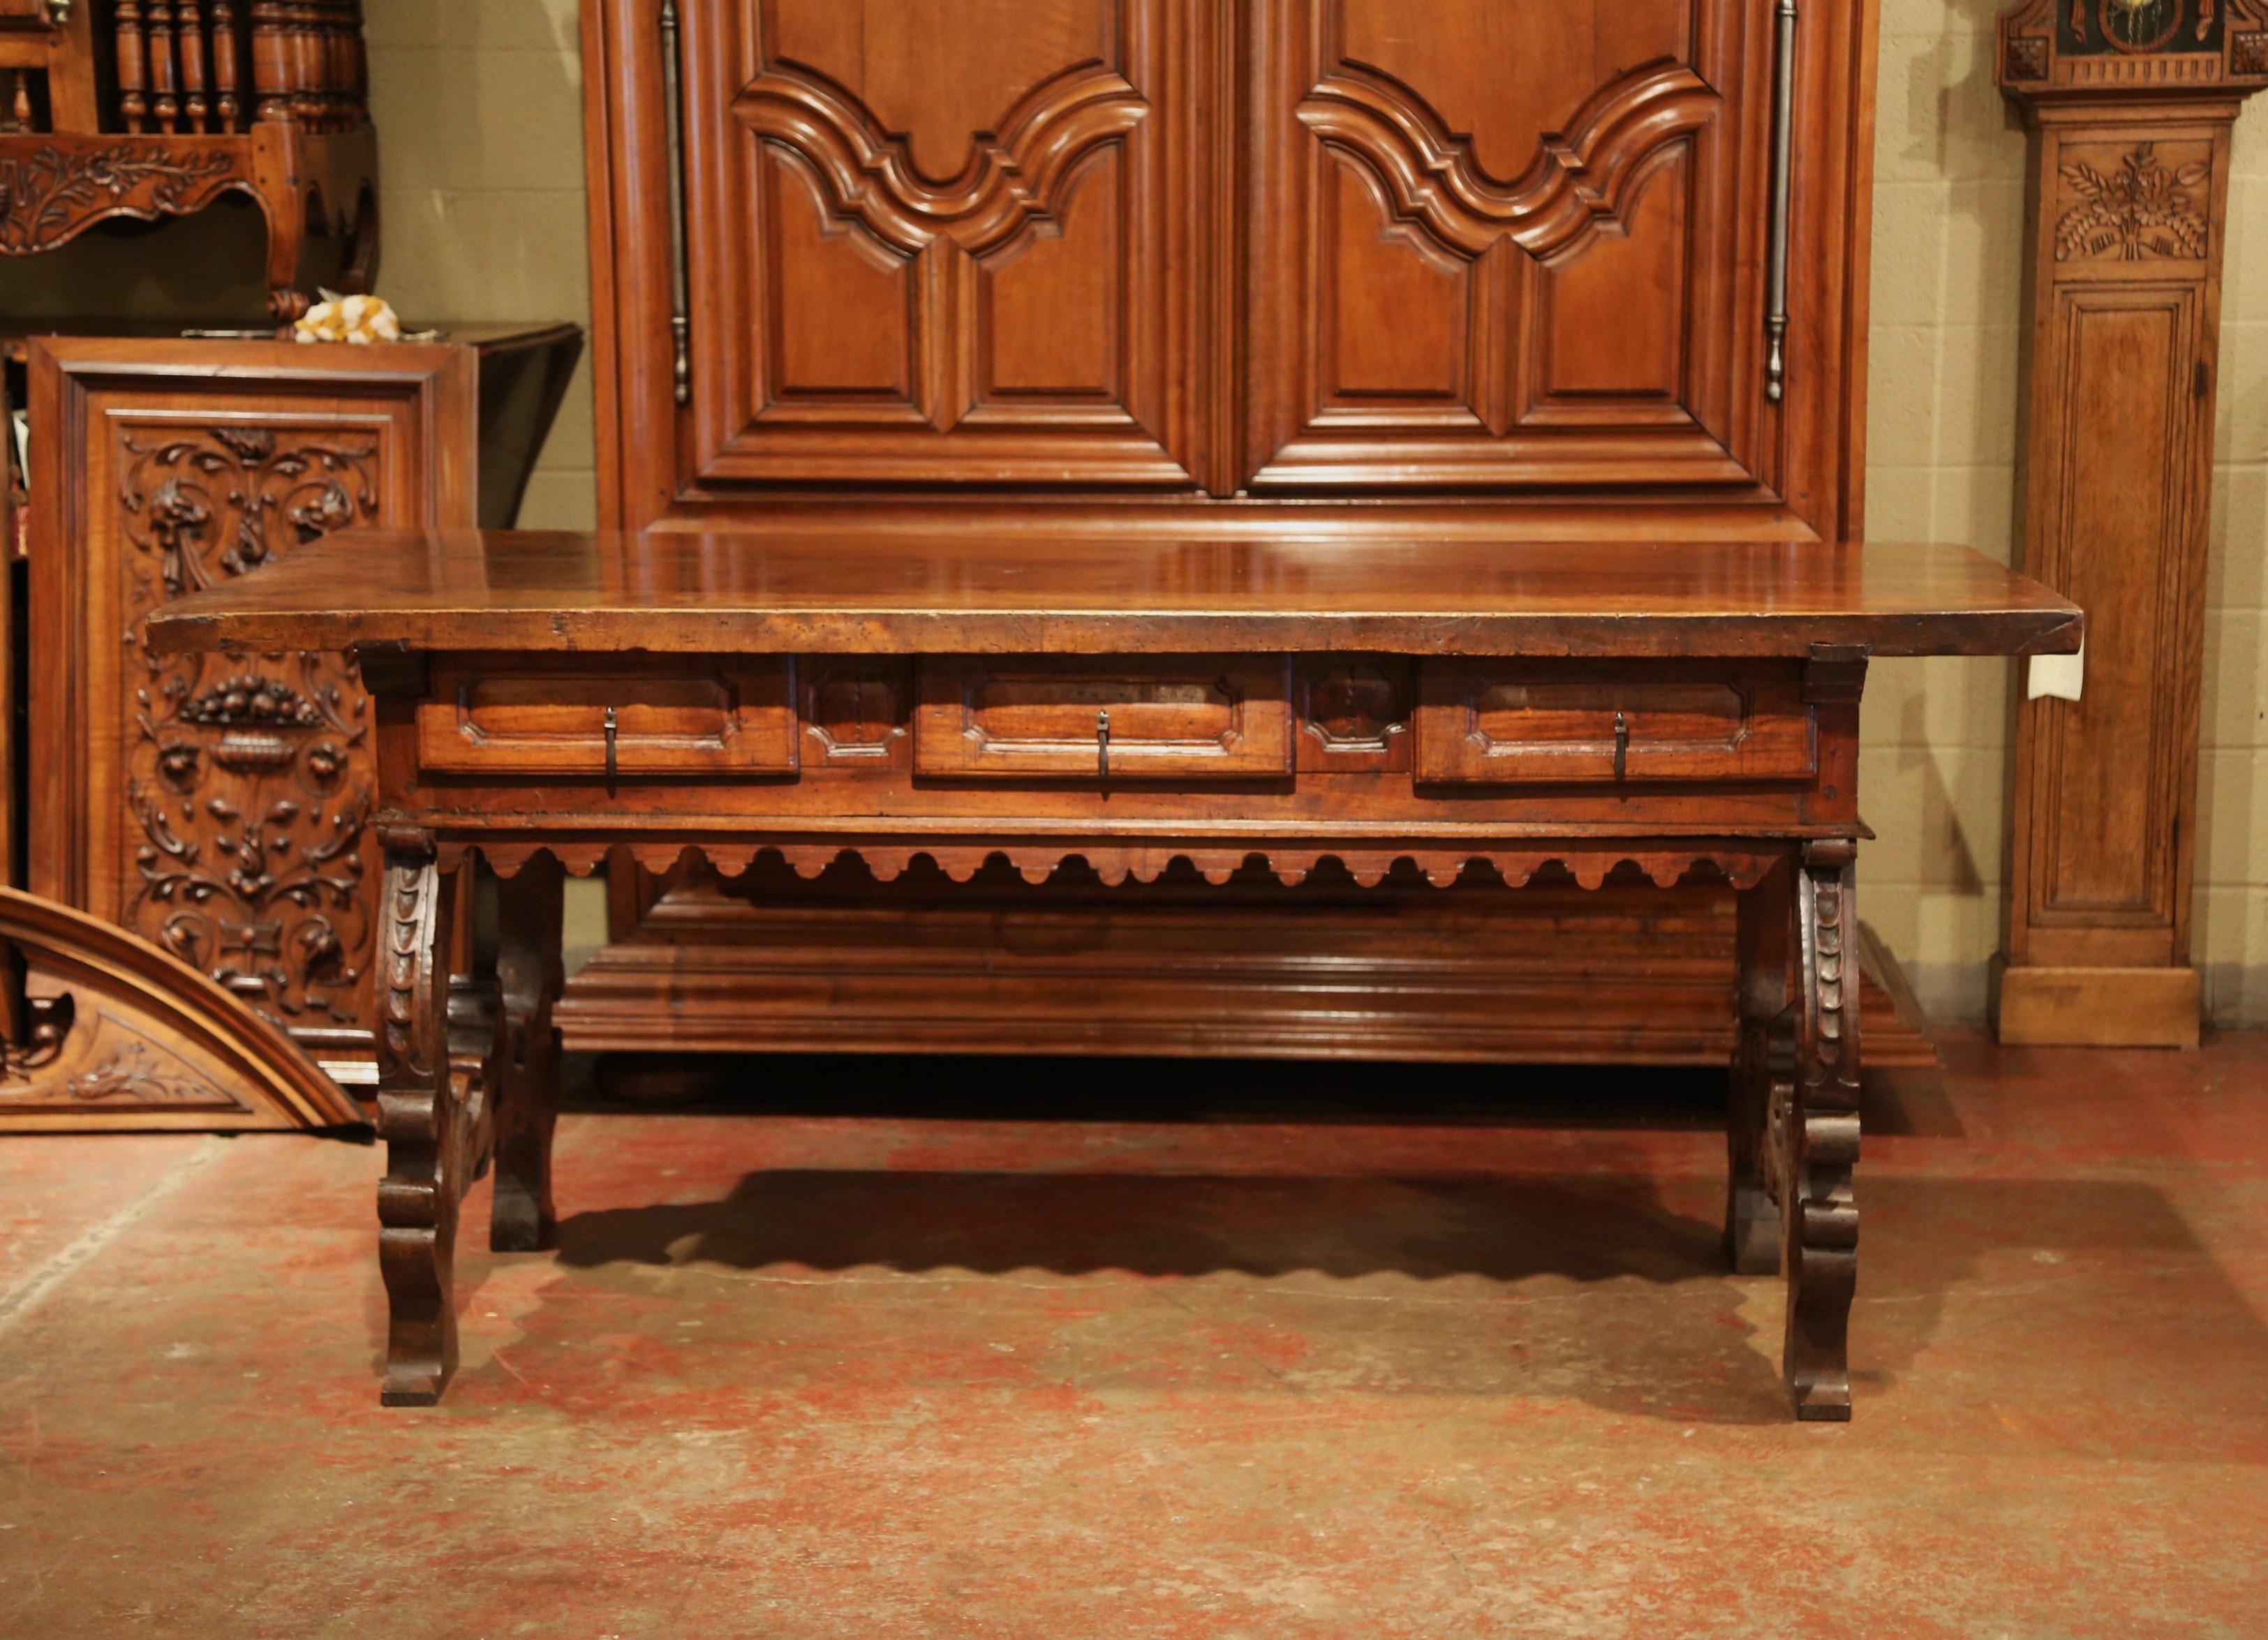 Carved in Spain, circa 1730, this important antique console table flaunts an impressive Gothic style. The large, fruitwood desk top made of a single wooden plank, features three sturdy drawers across the front with original forged pull handles, and